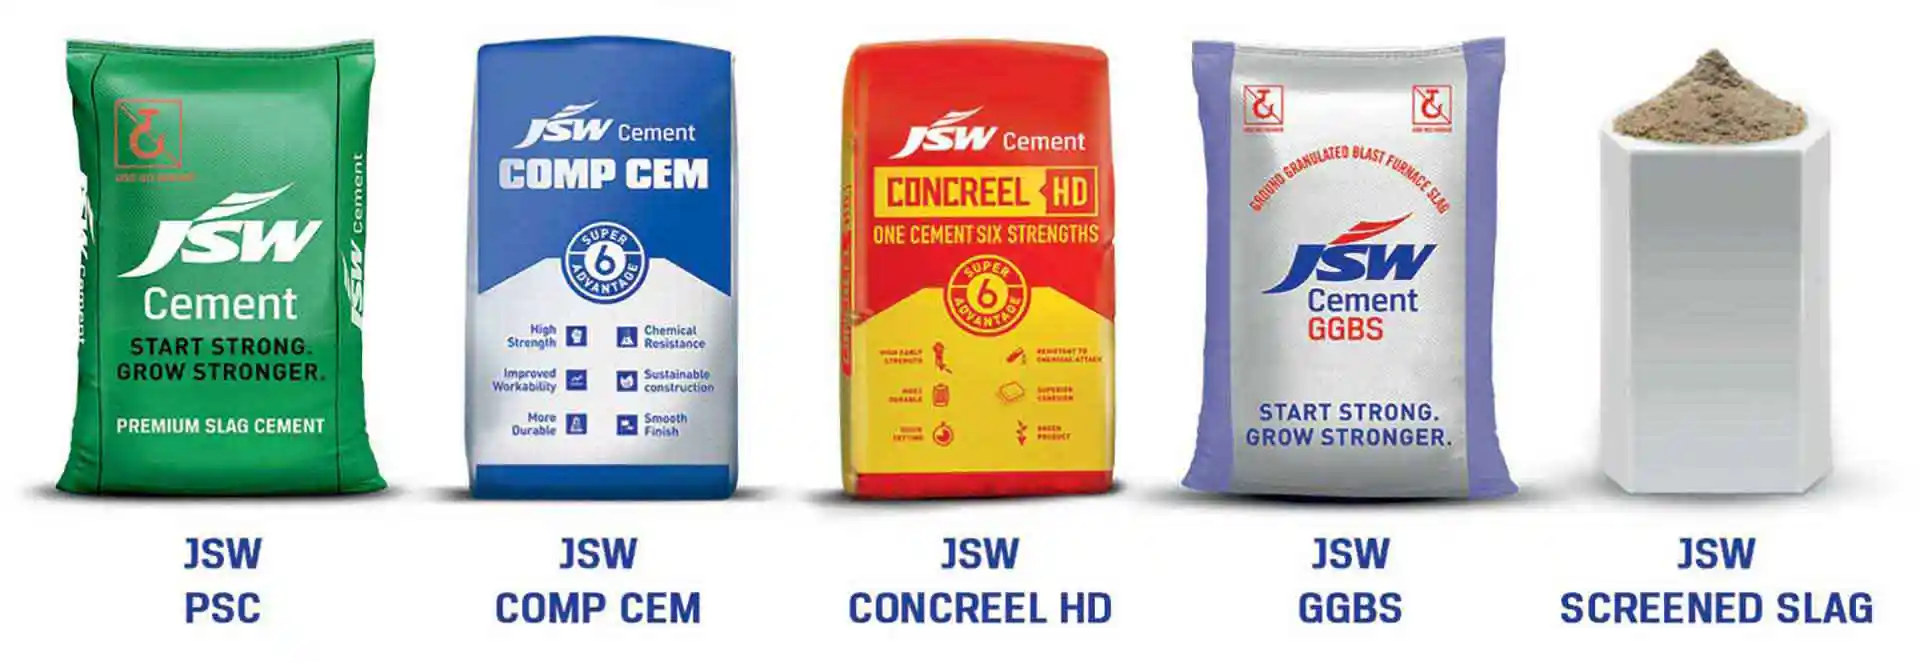 Green Products from the House of JSW Cement